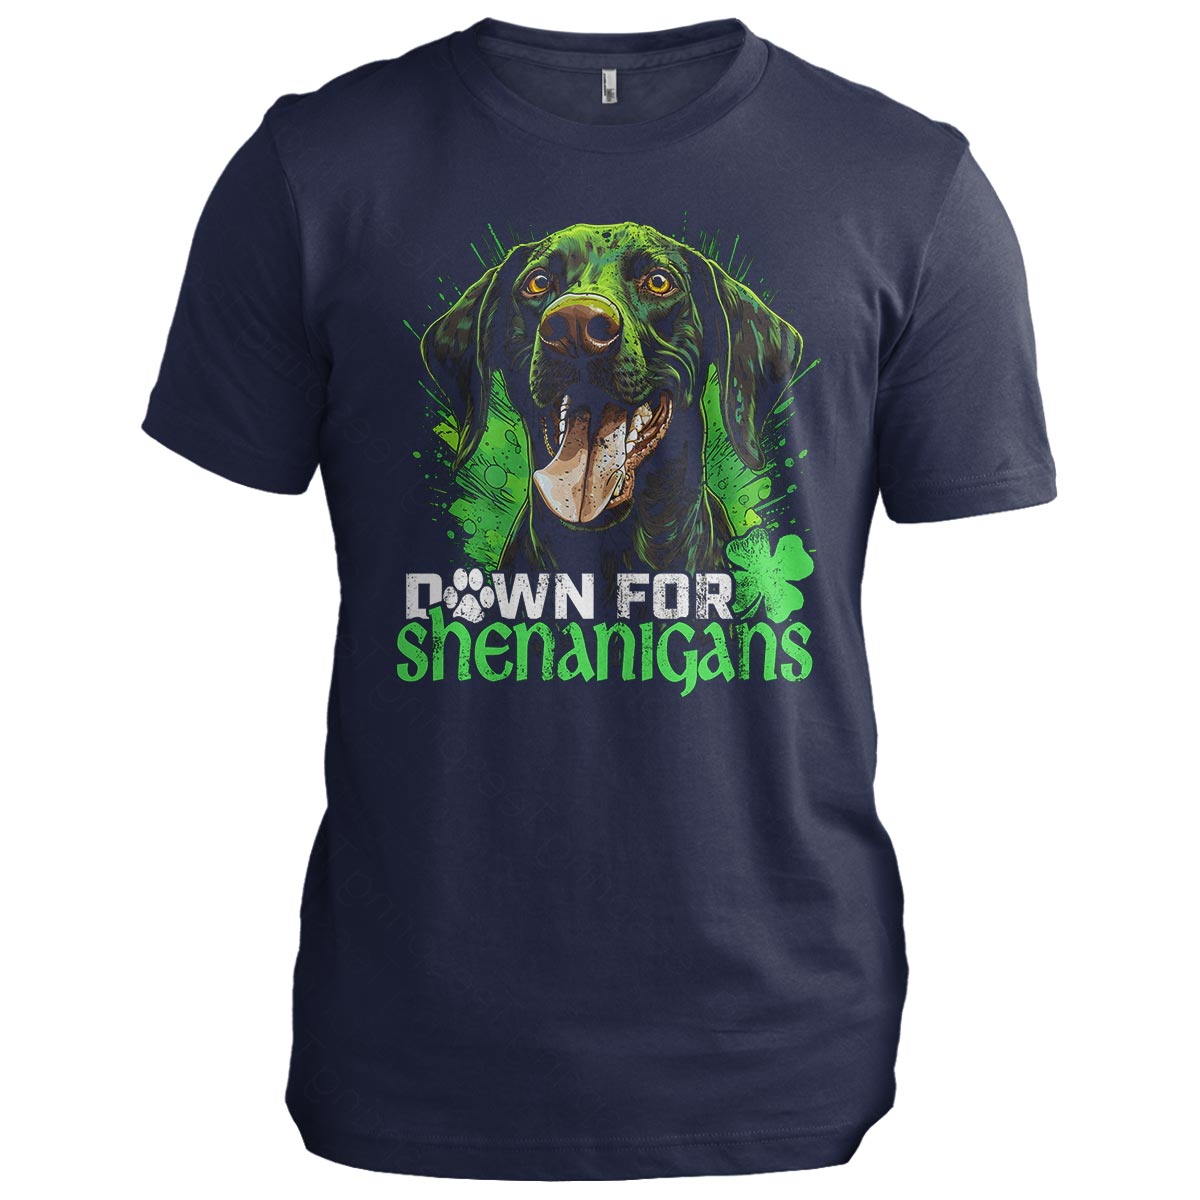 Down for Shenanigans: German Shorthaired Pointer